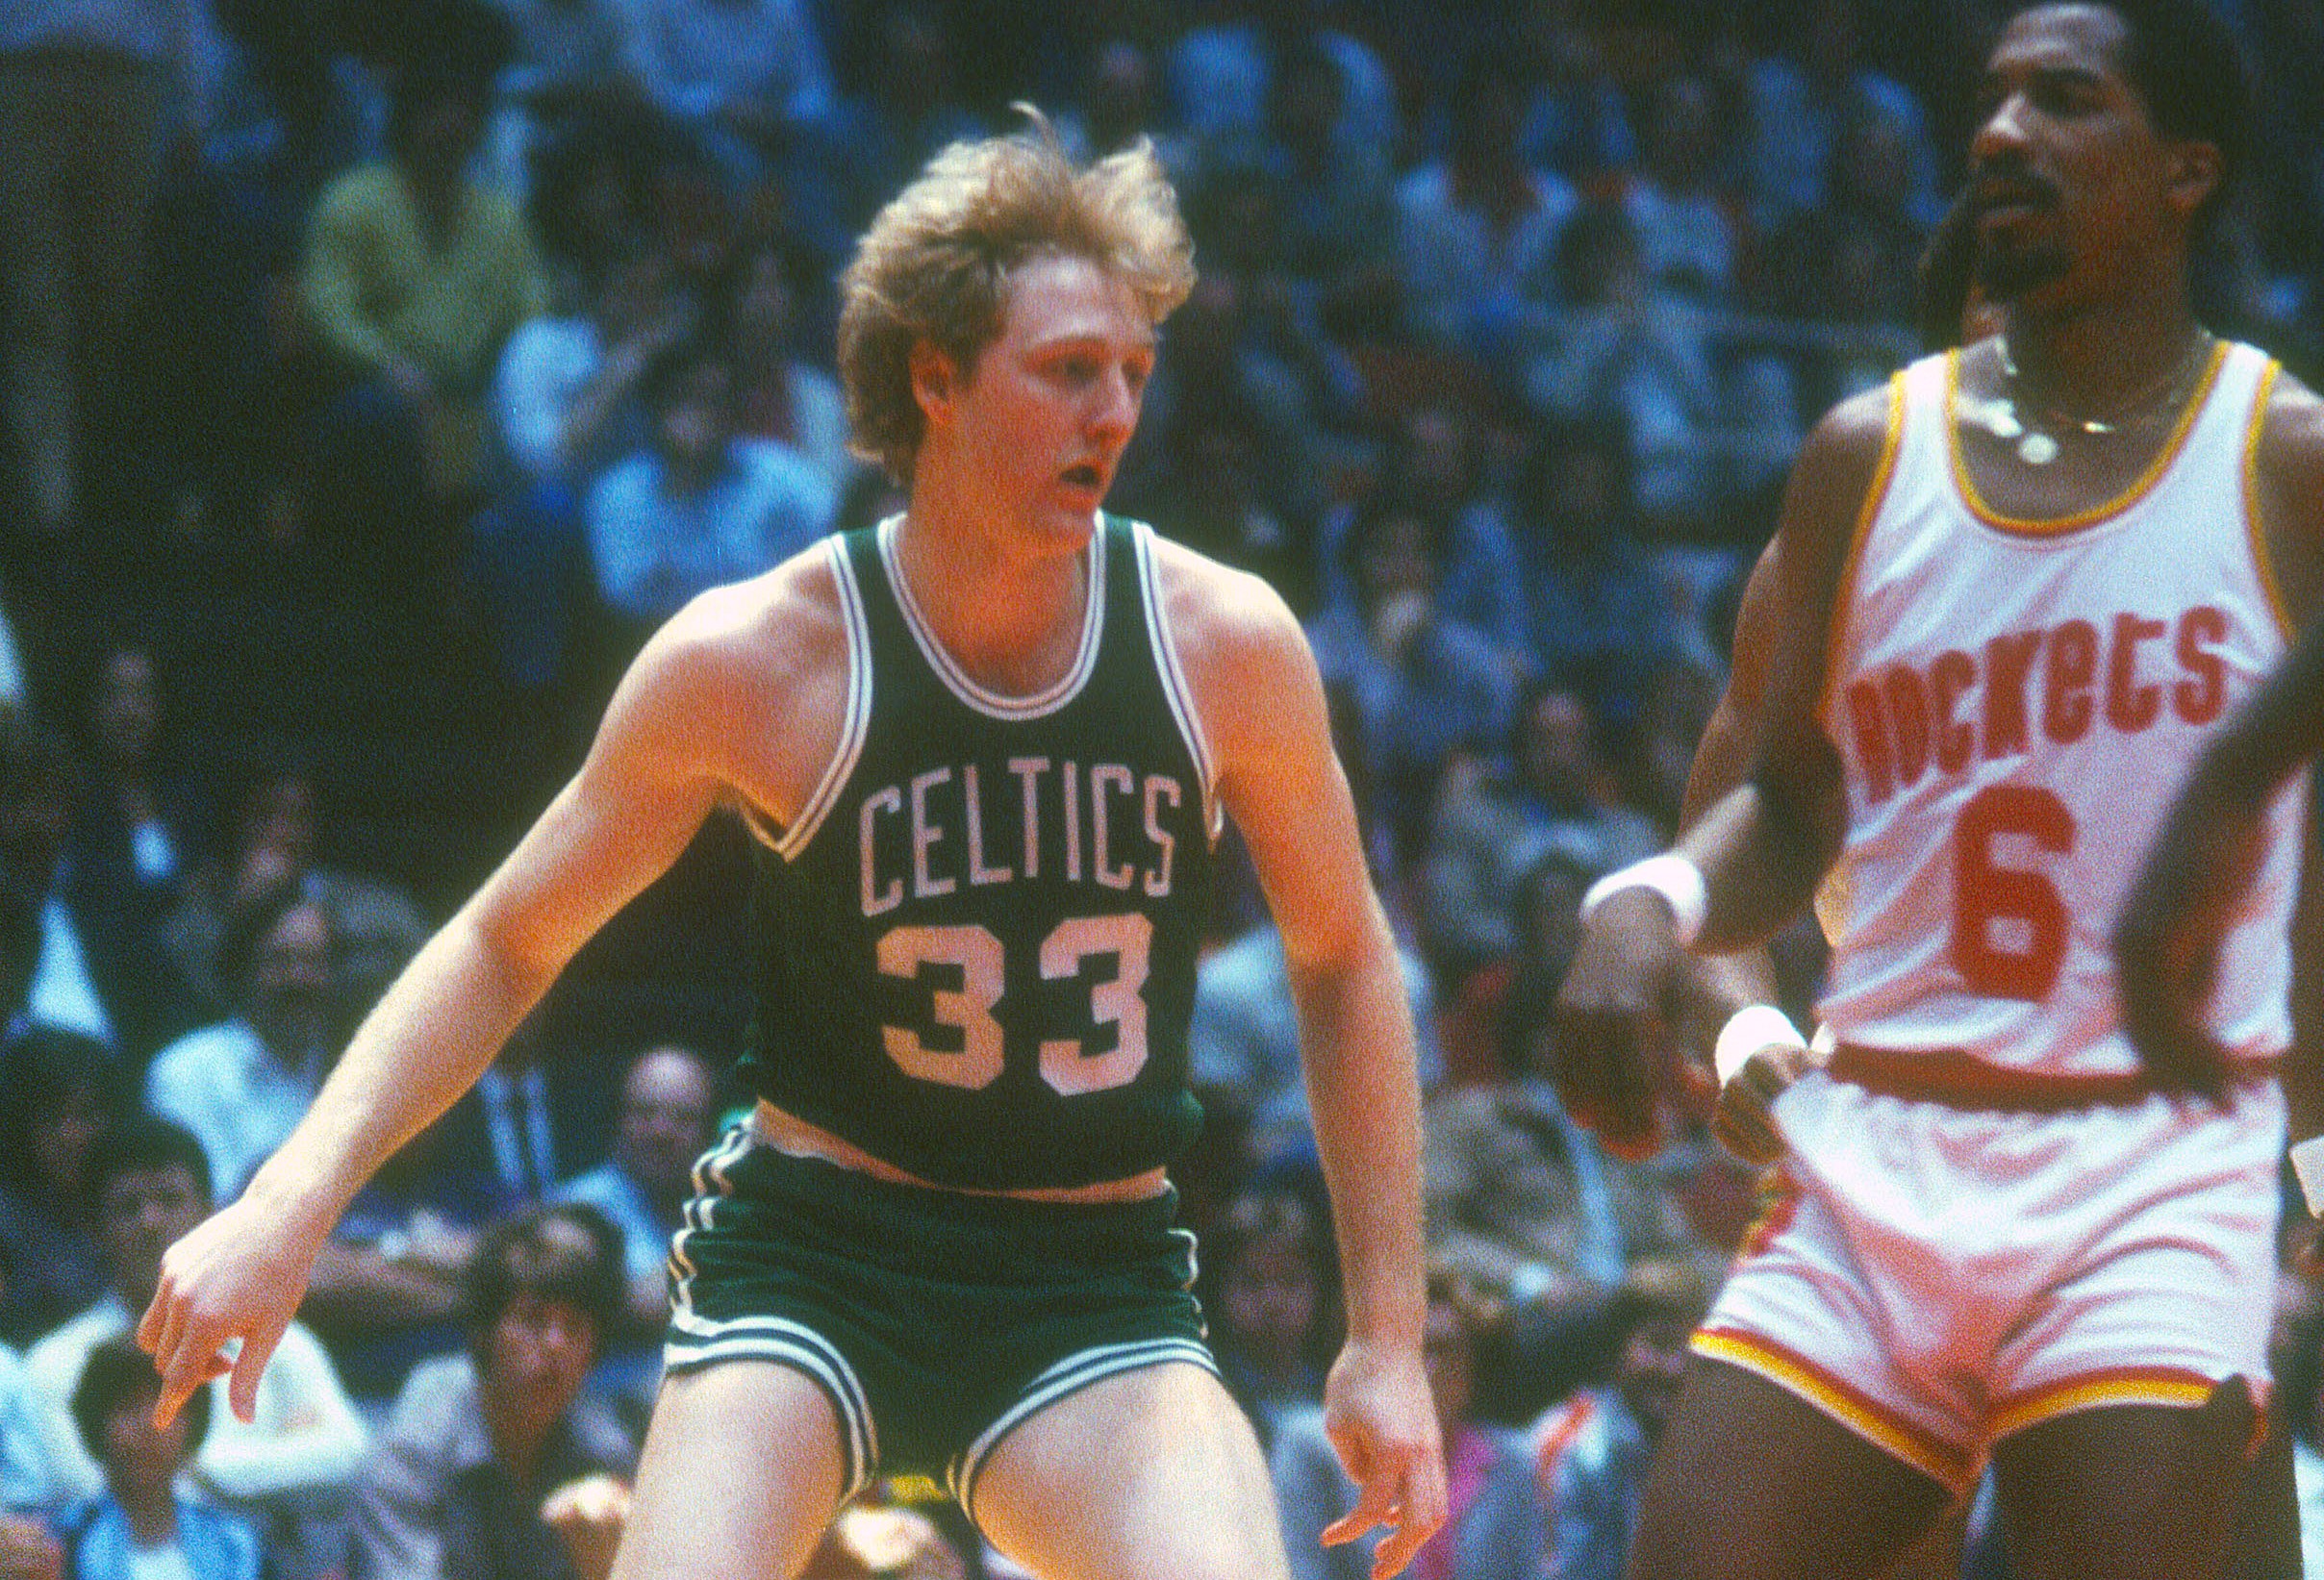 Larry Bird of the Boston Celtics in action against the Houston Rockets.